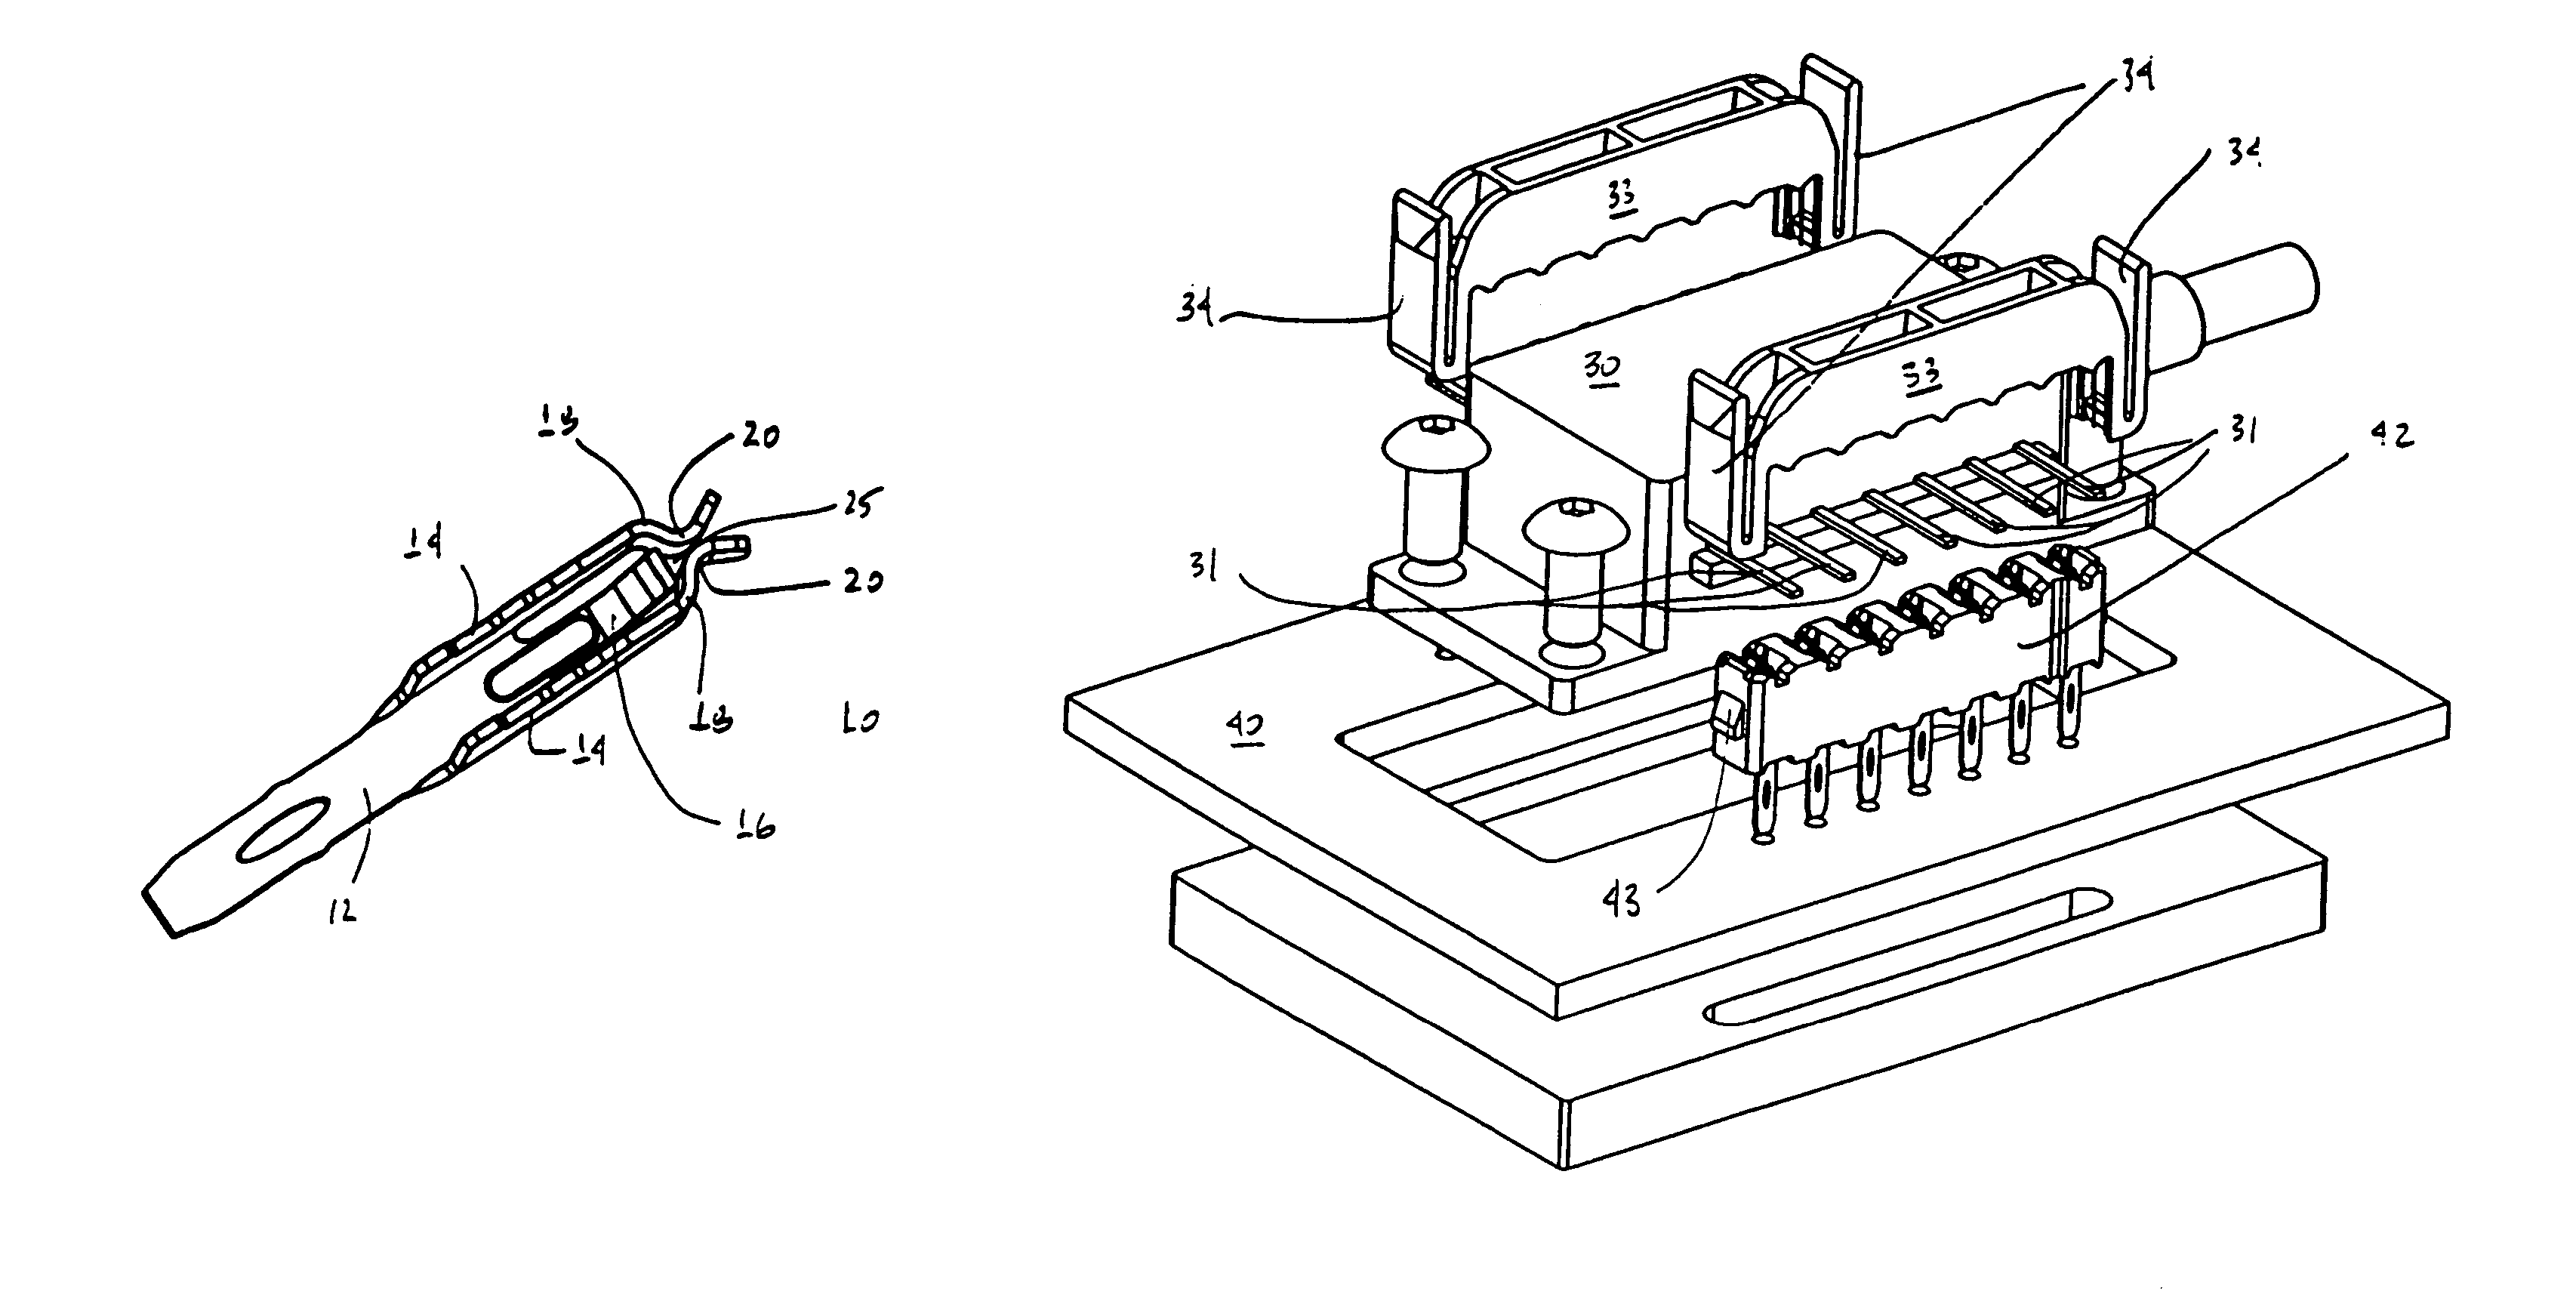 Spring contact for connectors